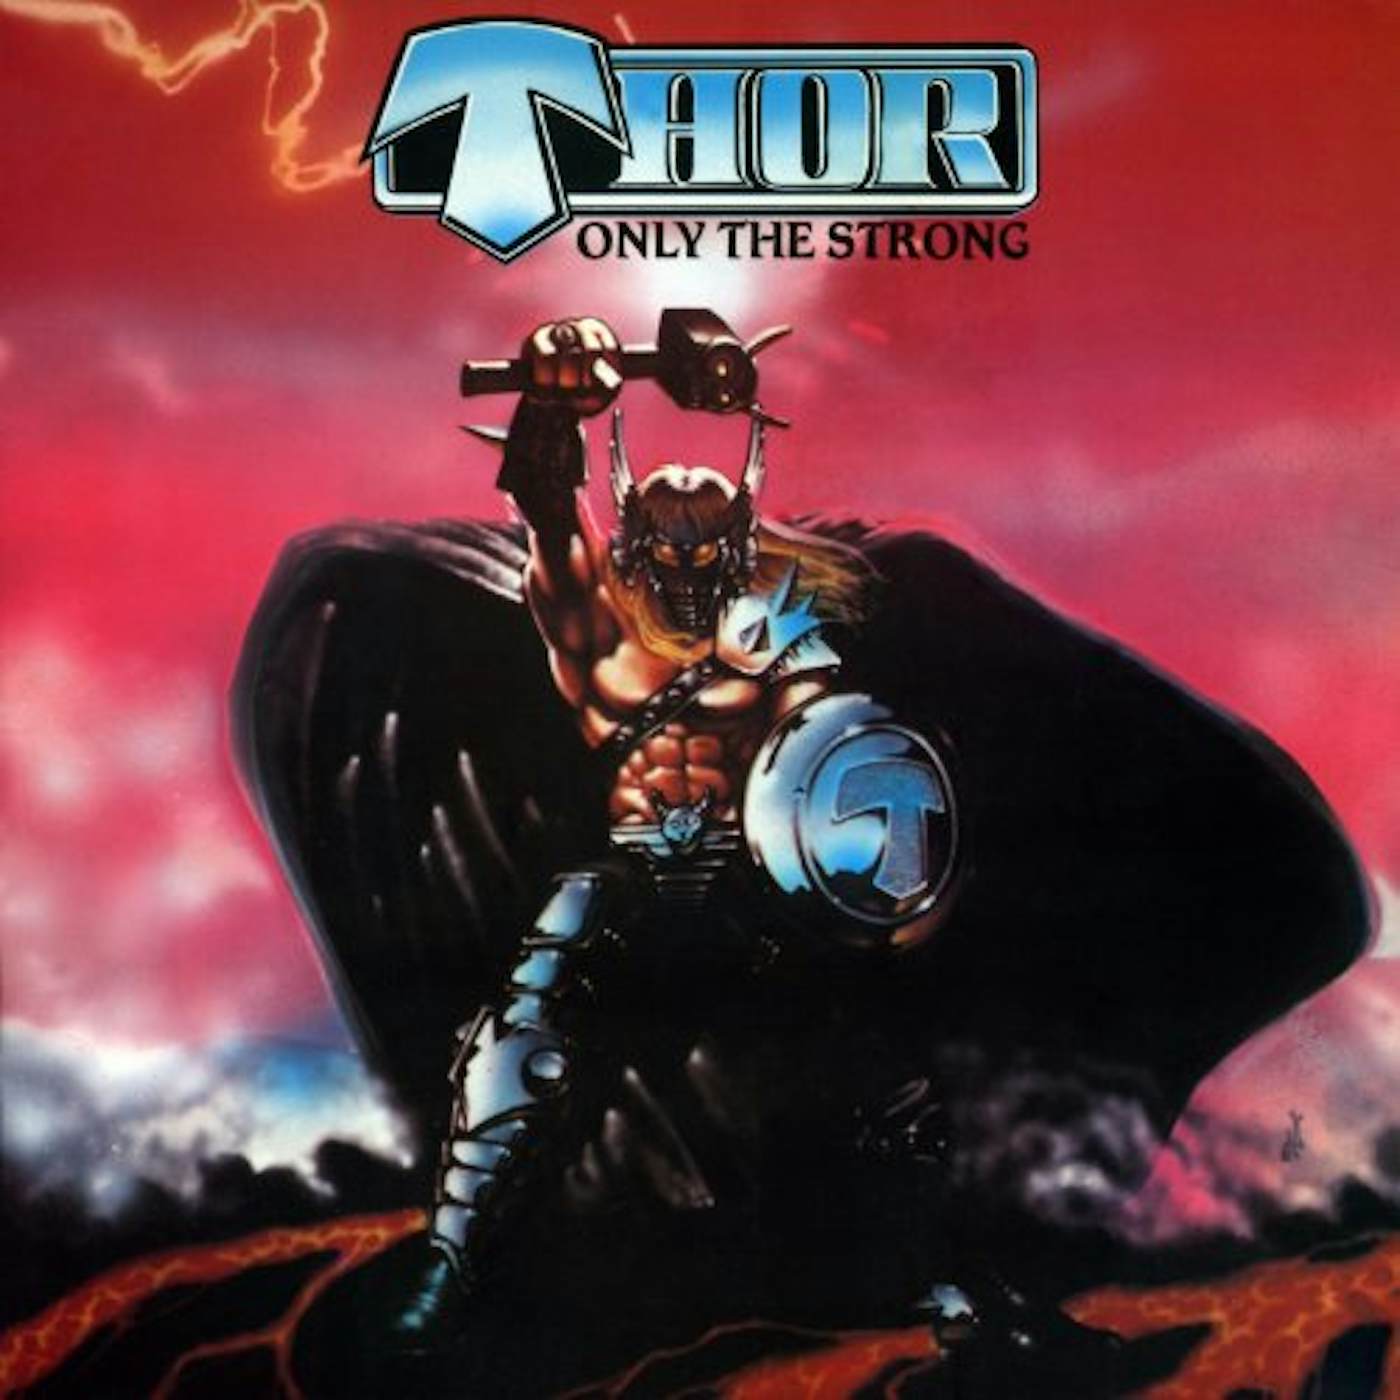 Thor Only the Strong Vinyl Record